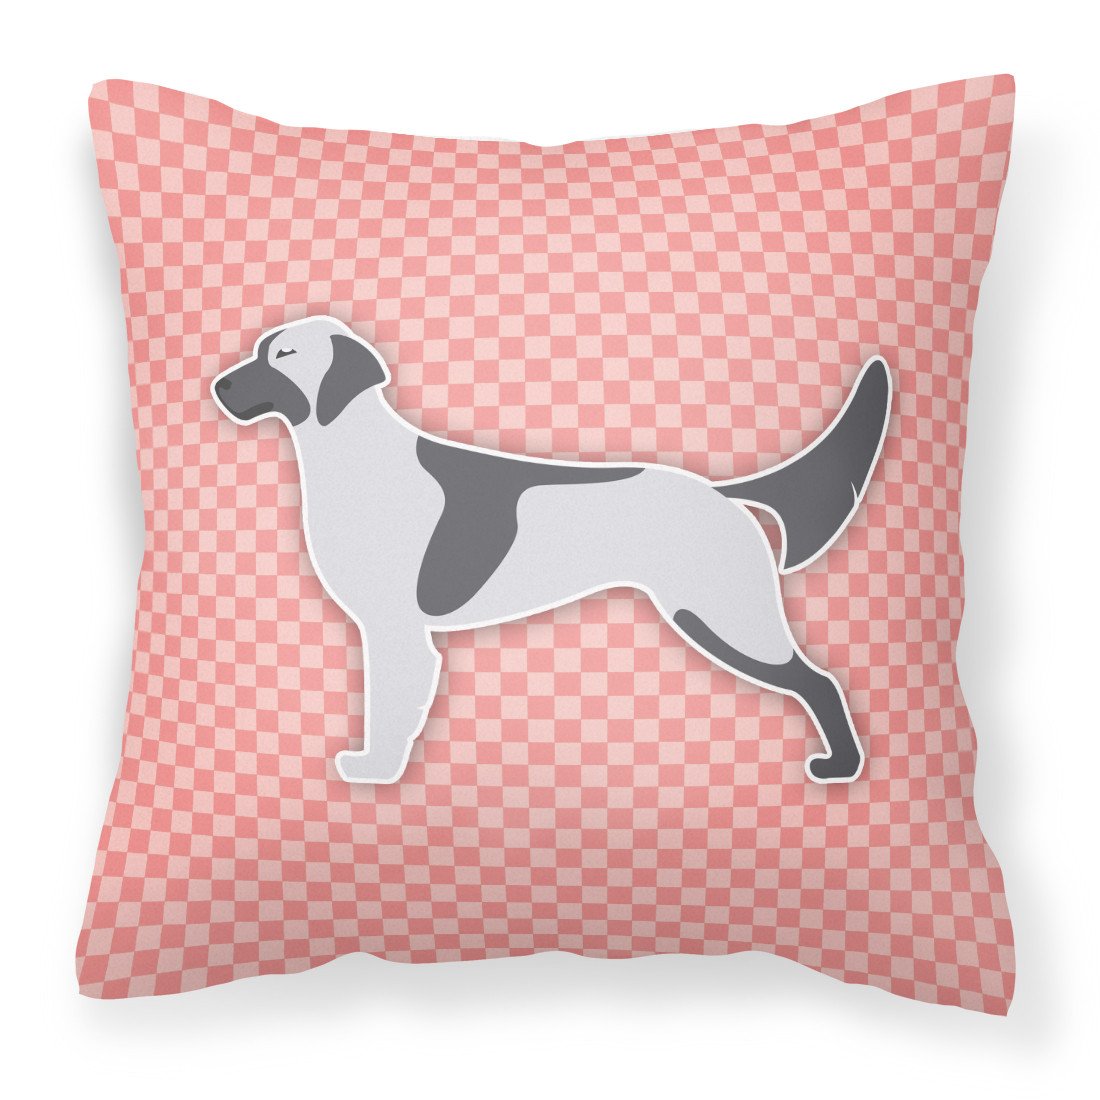 English Setter Checkerboard Pink Fabric Decorative Pillow BB3581PW1818 by Caroline's Treasures